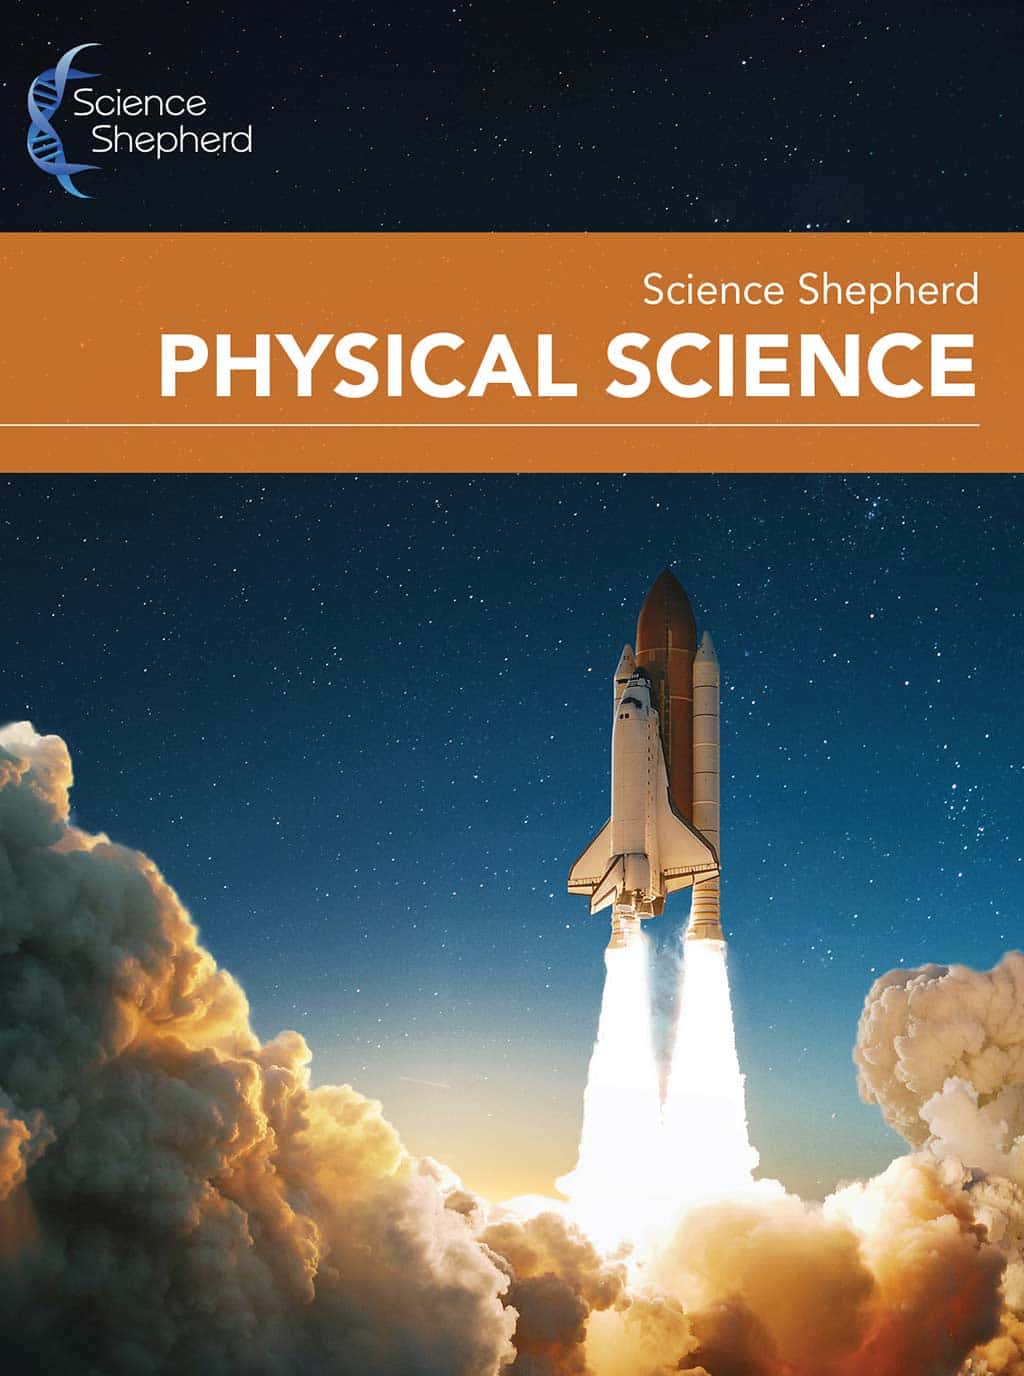 Homeschool Physical Science cover of a shuttle launch at night with stars in the sky